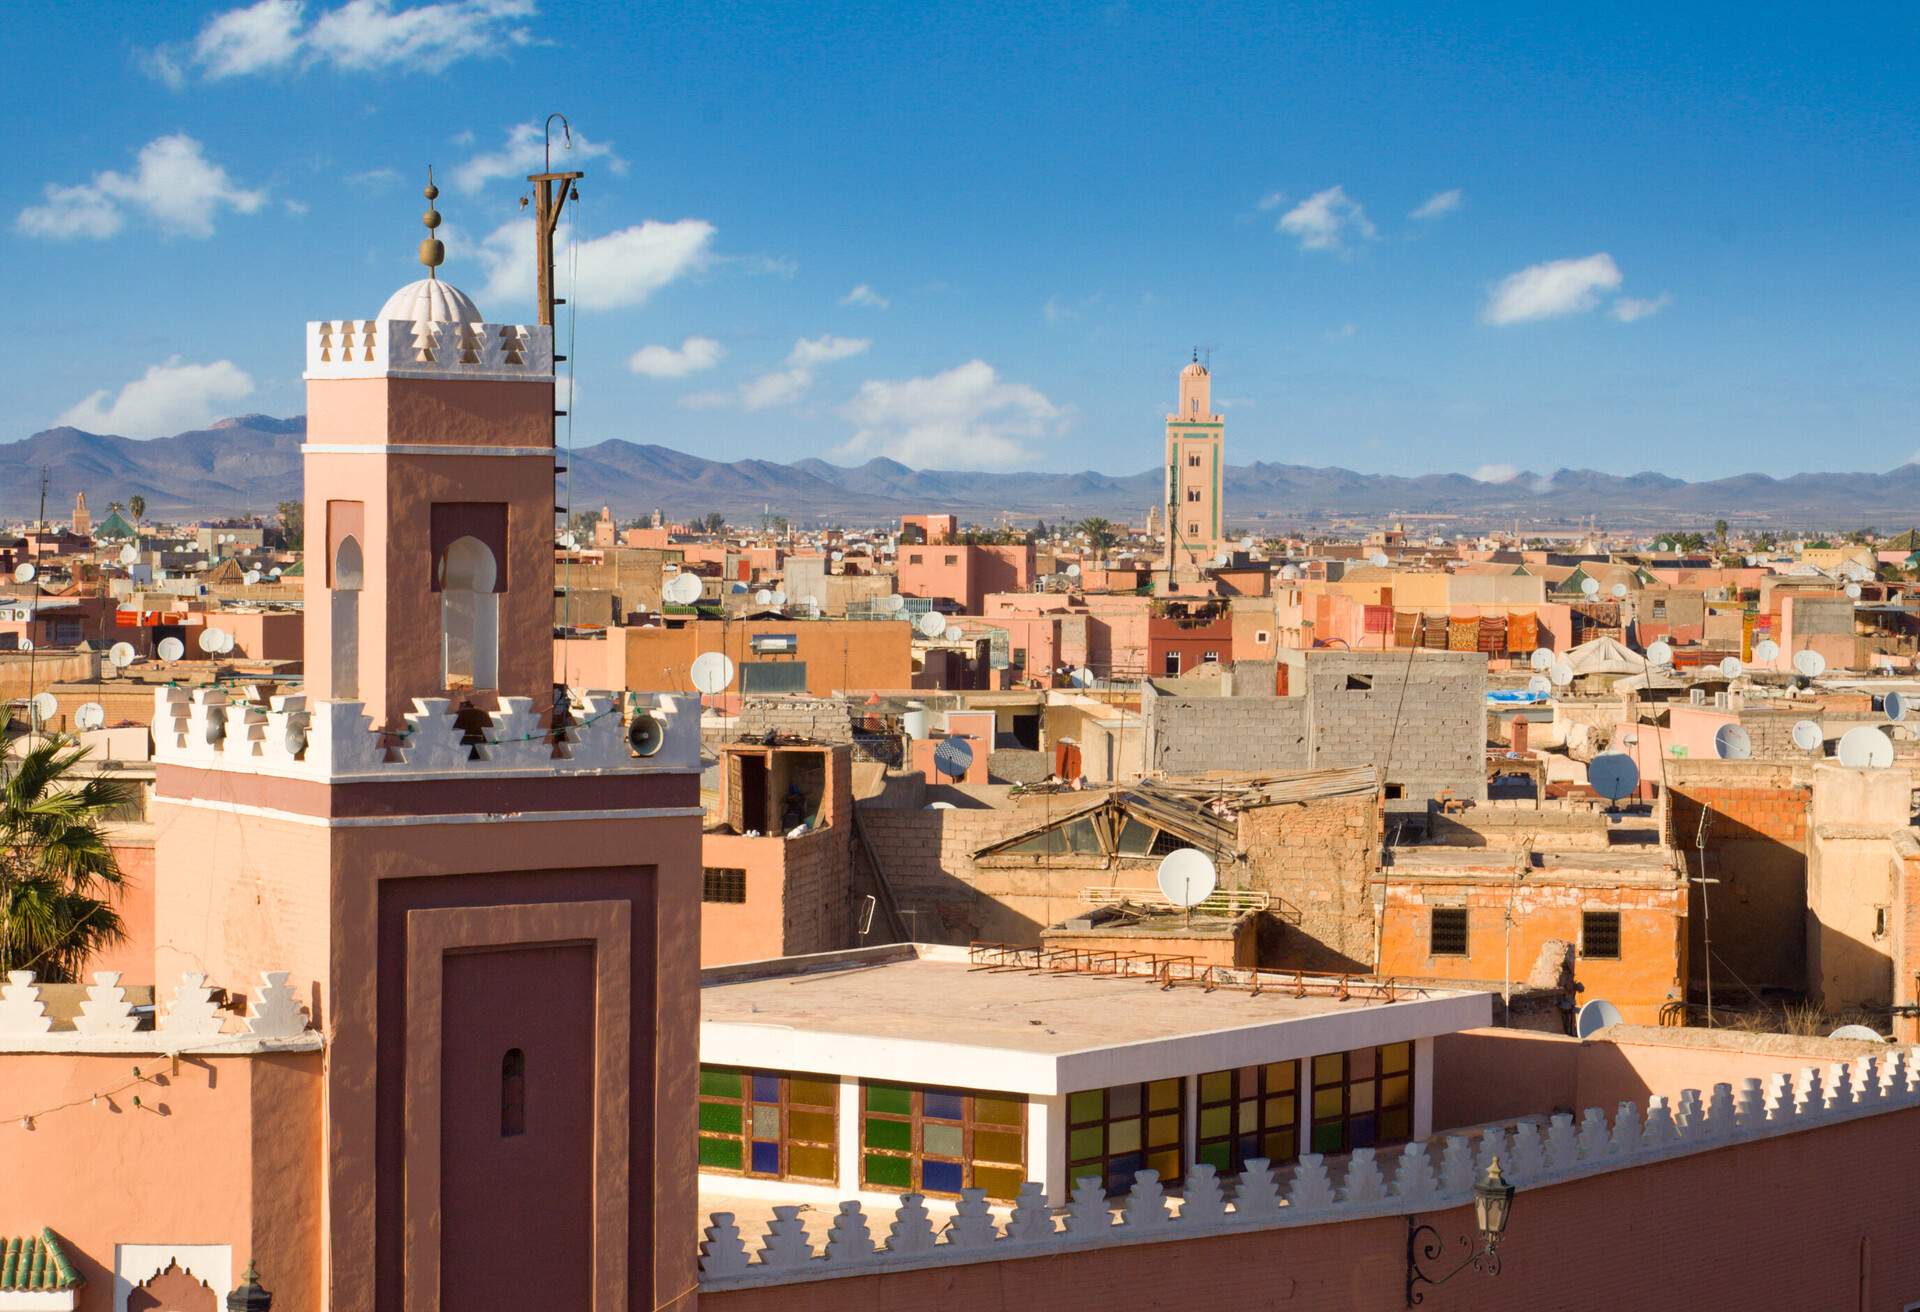 Minaret Tower On The Historical Walled City (medina) In Marrakech. Morocco